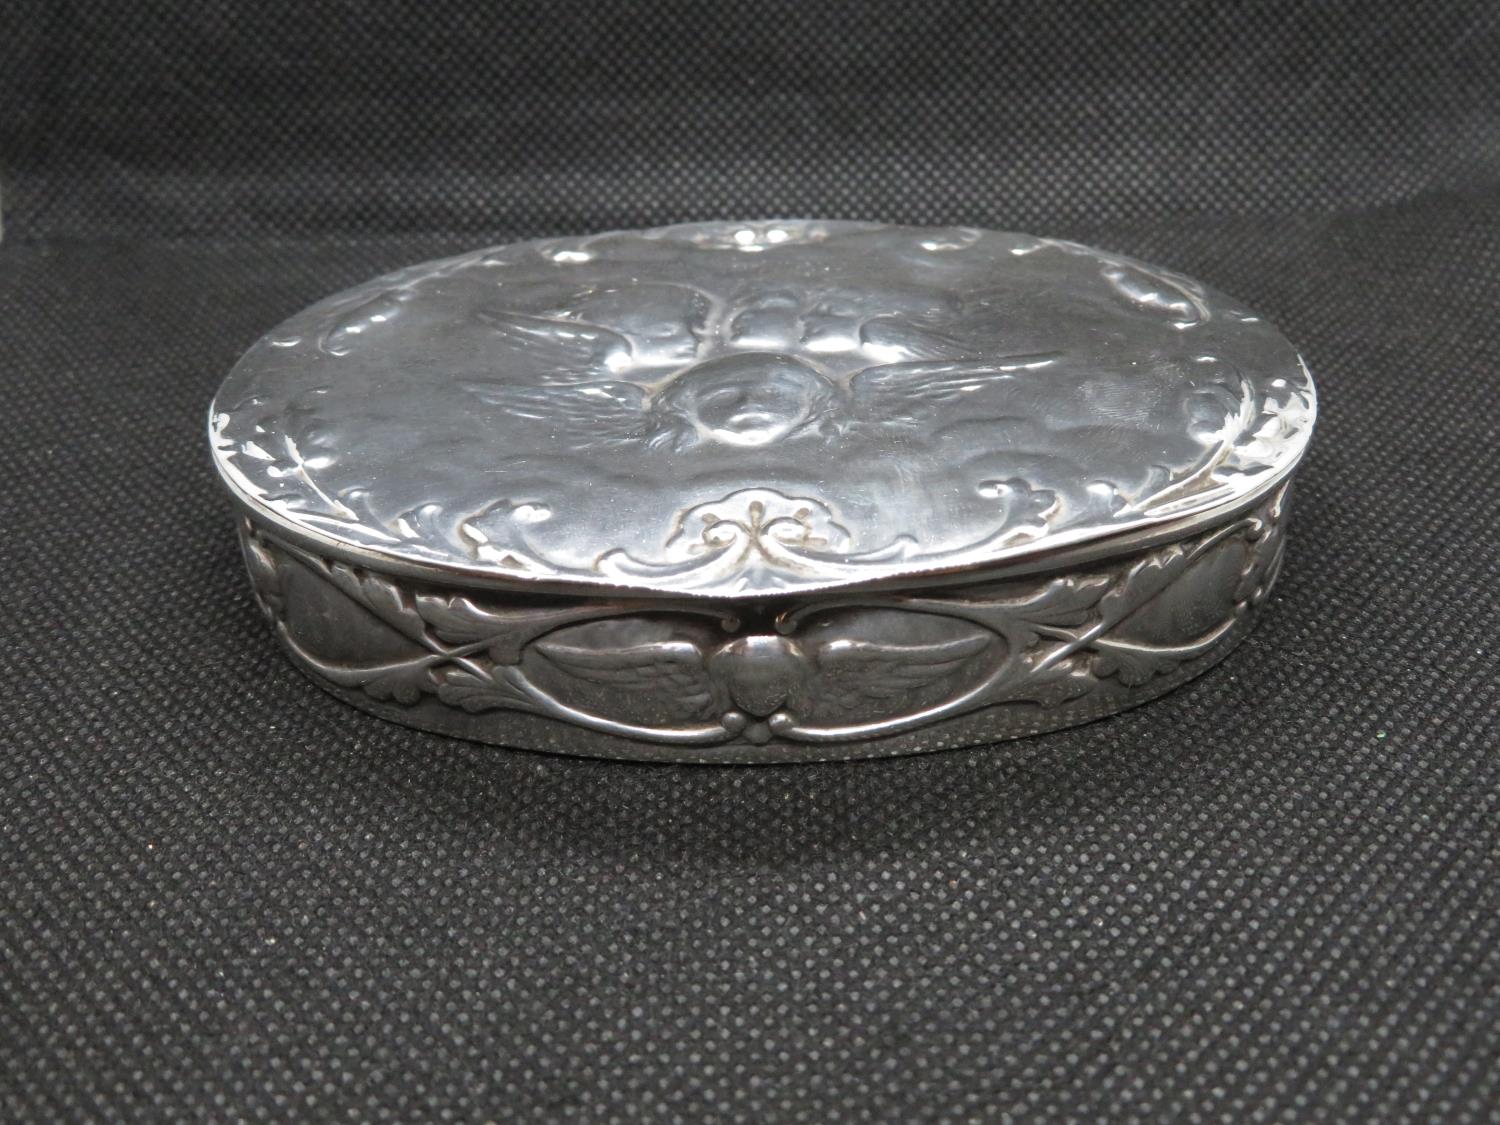 Silver table snuff box by William Comyns London 1904 83g